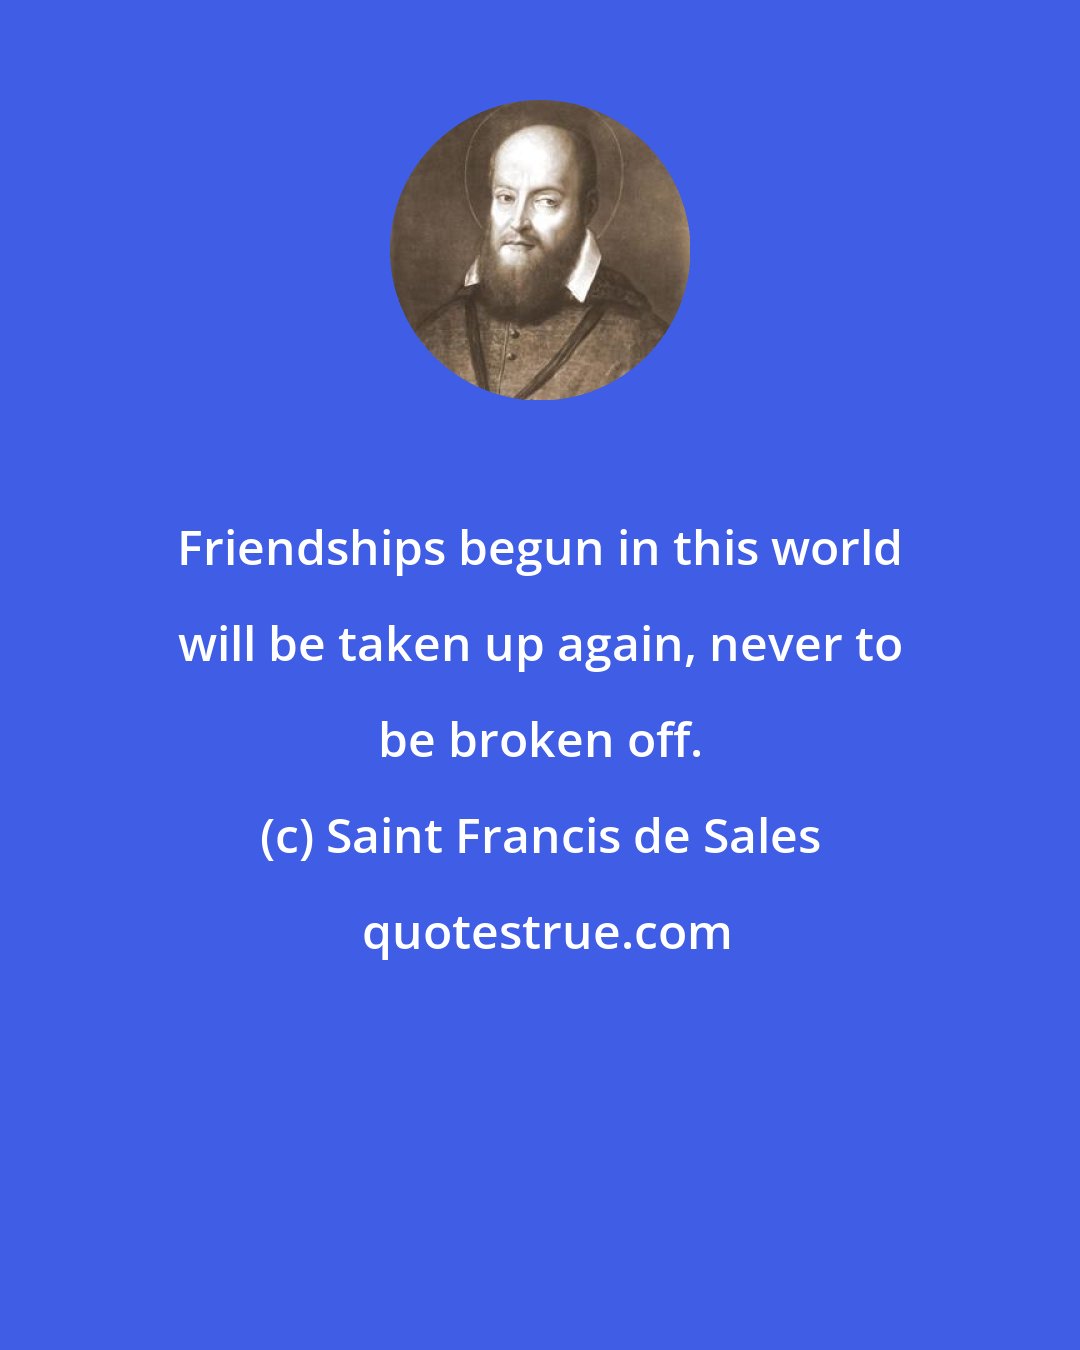 Saint Francis de Sales: Friendships begun in this world will be taken up again, never to be broken off.